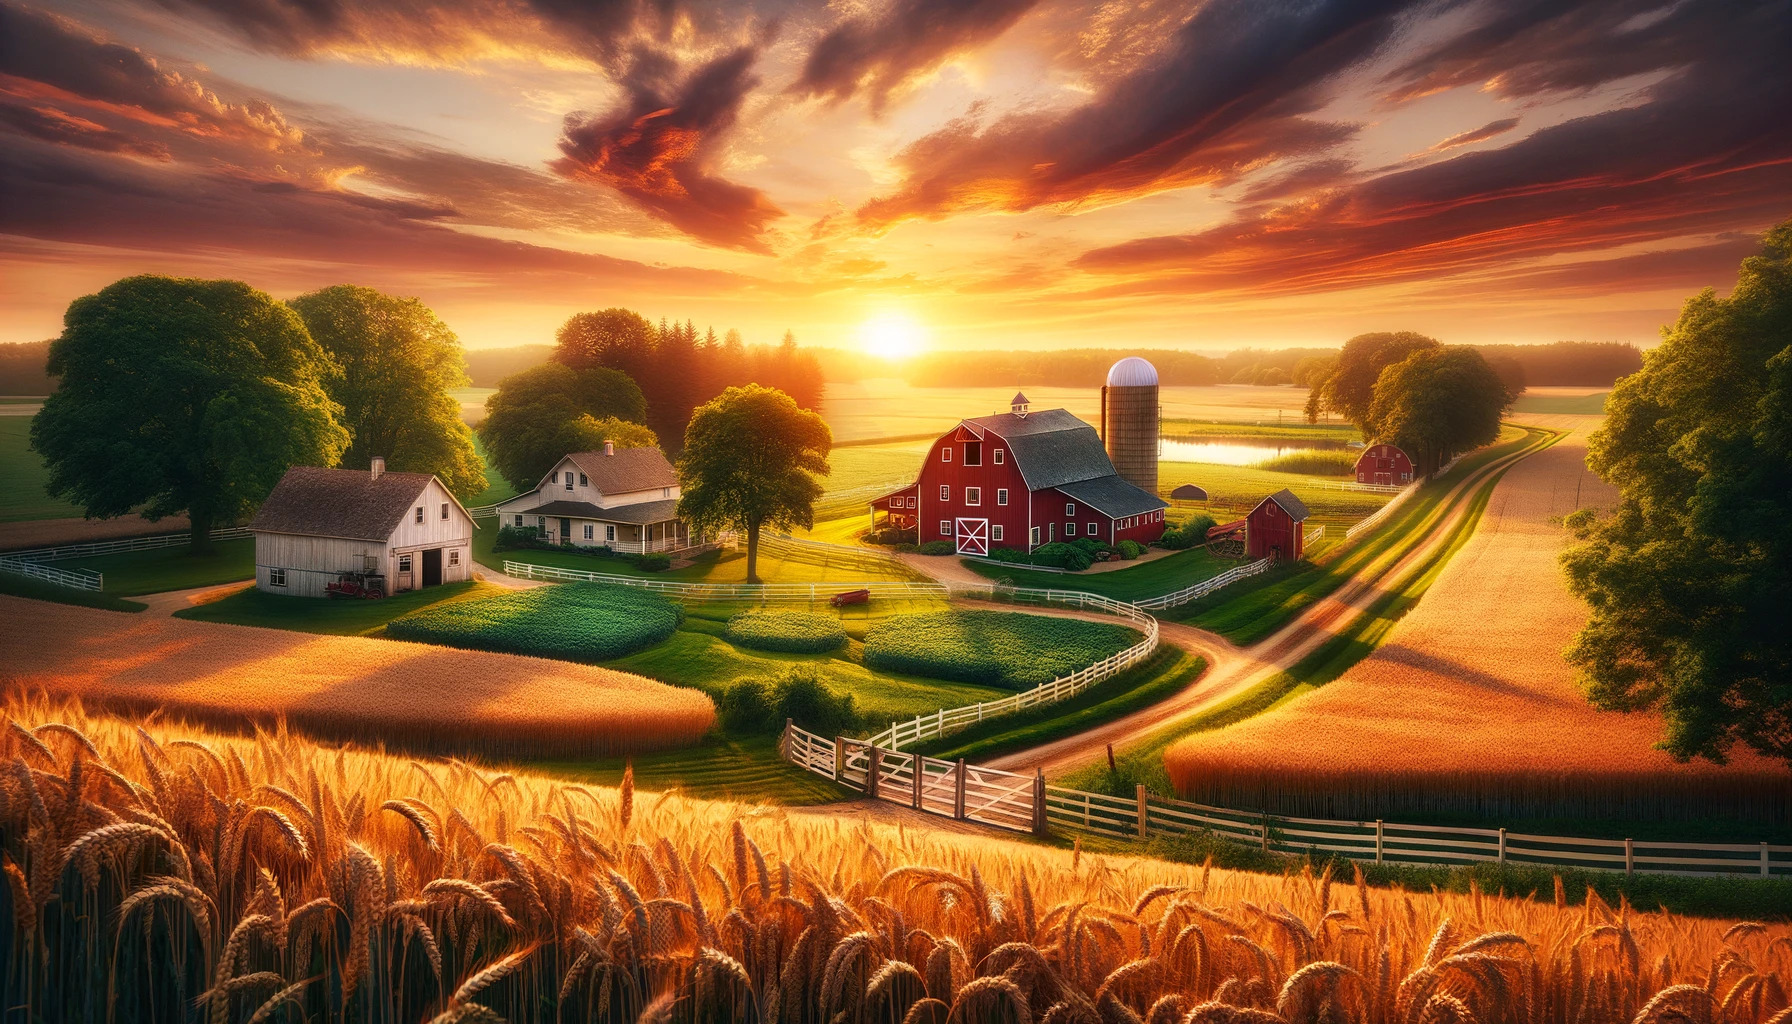 a cinematic image inspired by the essence of a serene farm setting. The golden hour brings out the warmth and tranquility of this rural landscape. Enjoy exploring every detail!